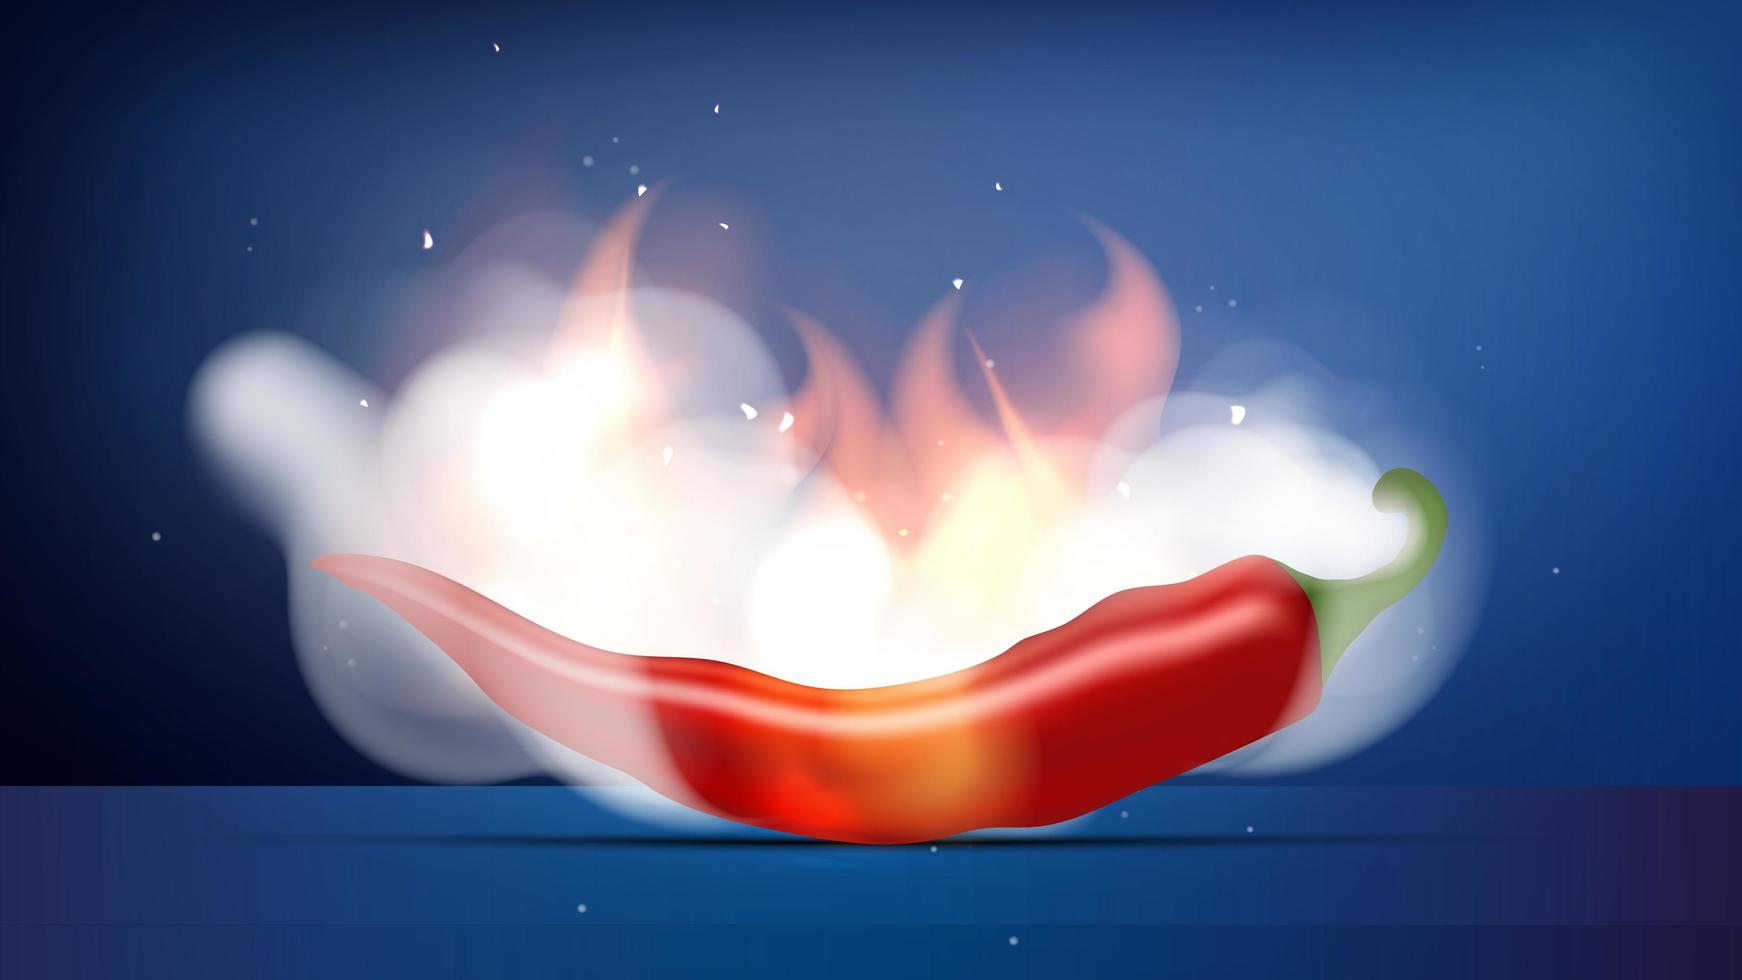 Red hot peppers on fire and smoke. Chili peppers white clouds of smoke and flames. Ready poster or banner for advertising. Realistic style. Vector illustration.